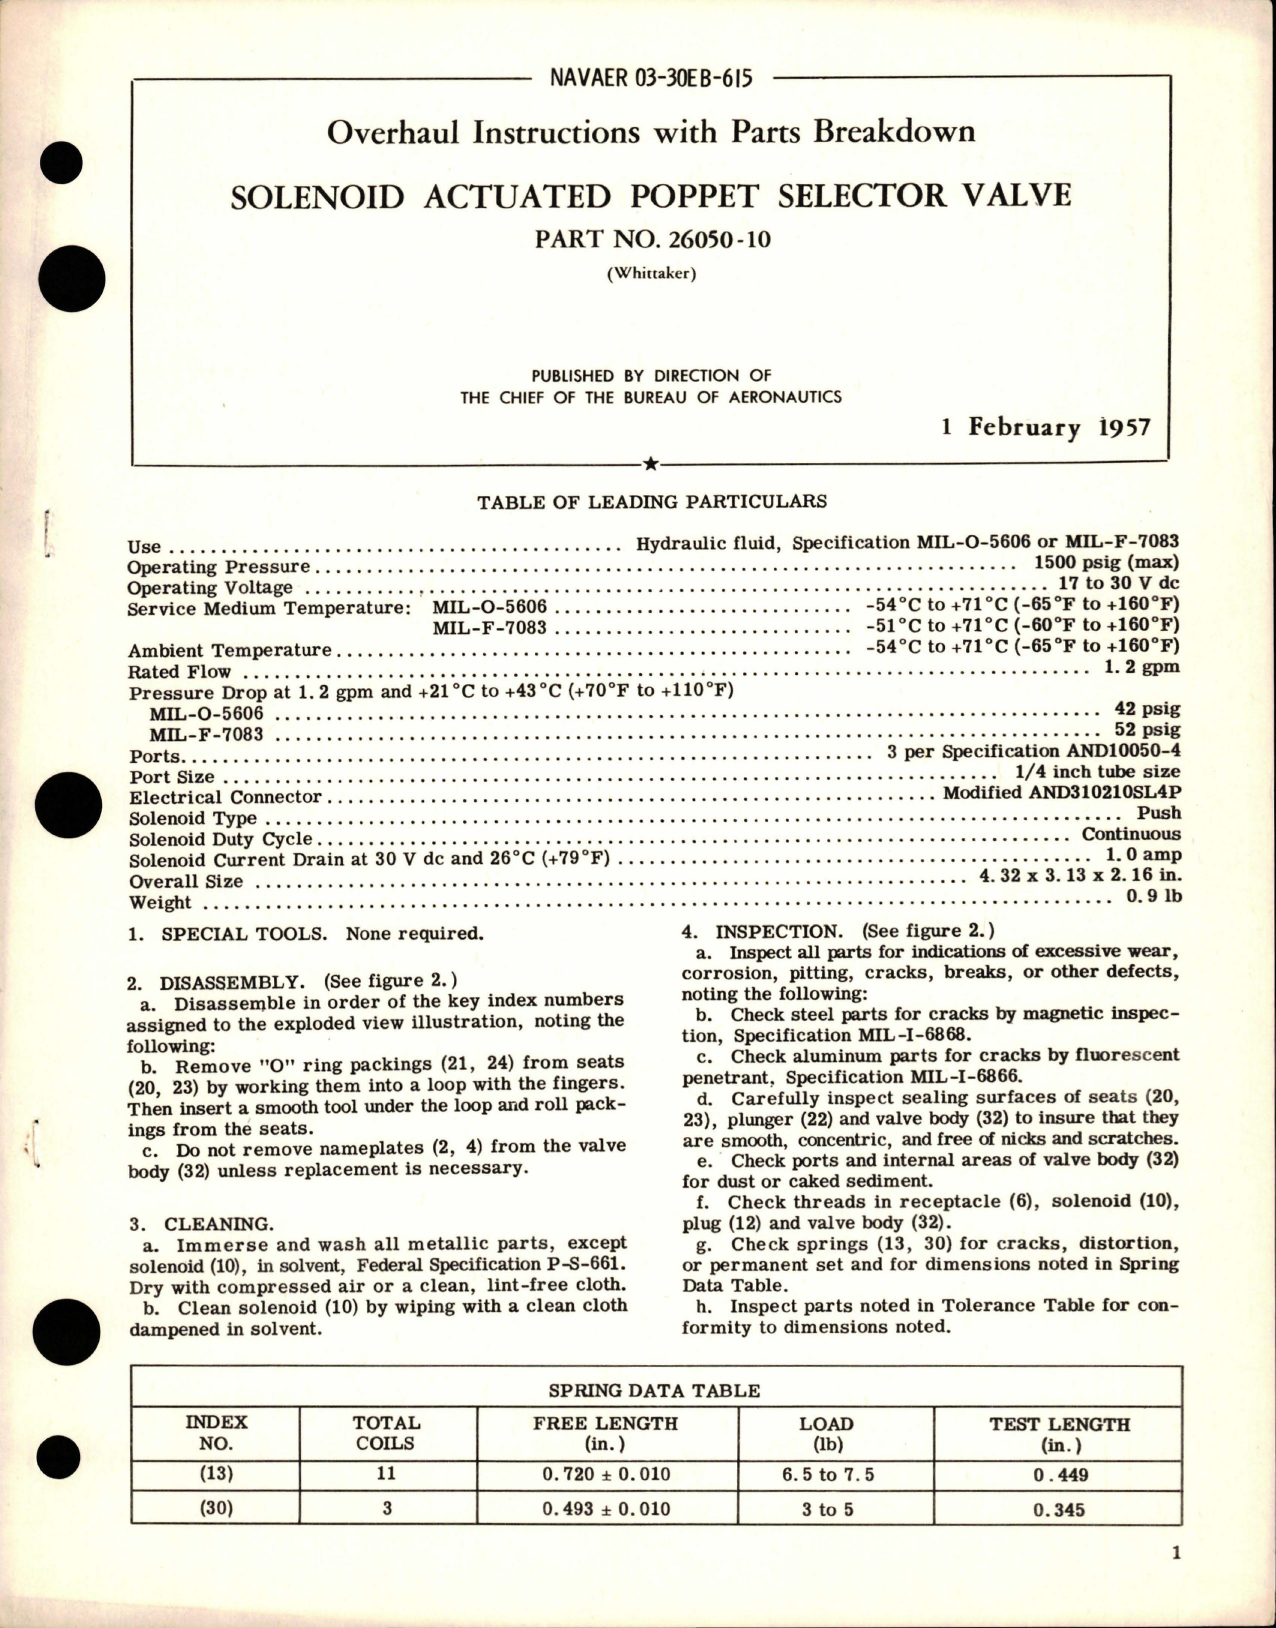 Sample page 1 from AirCorps Library document: Overhaul Instructions with Parts for Solenoid Actuated Poppet Selector Valve - Part 26050-10